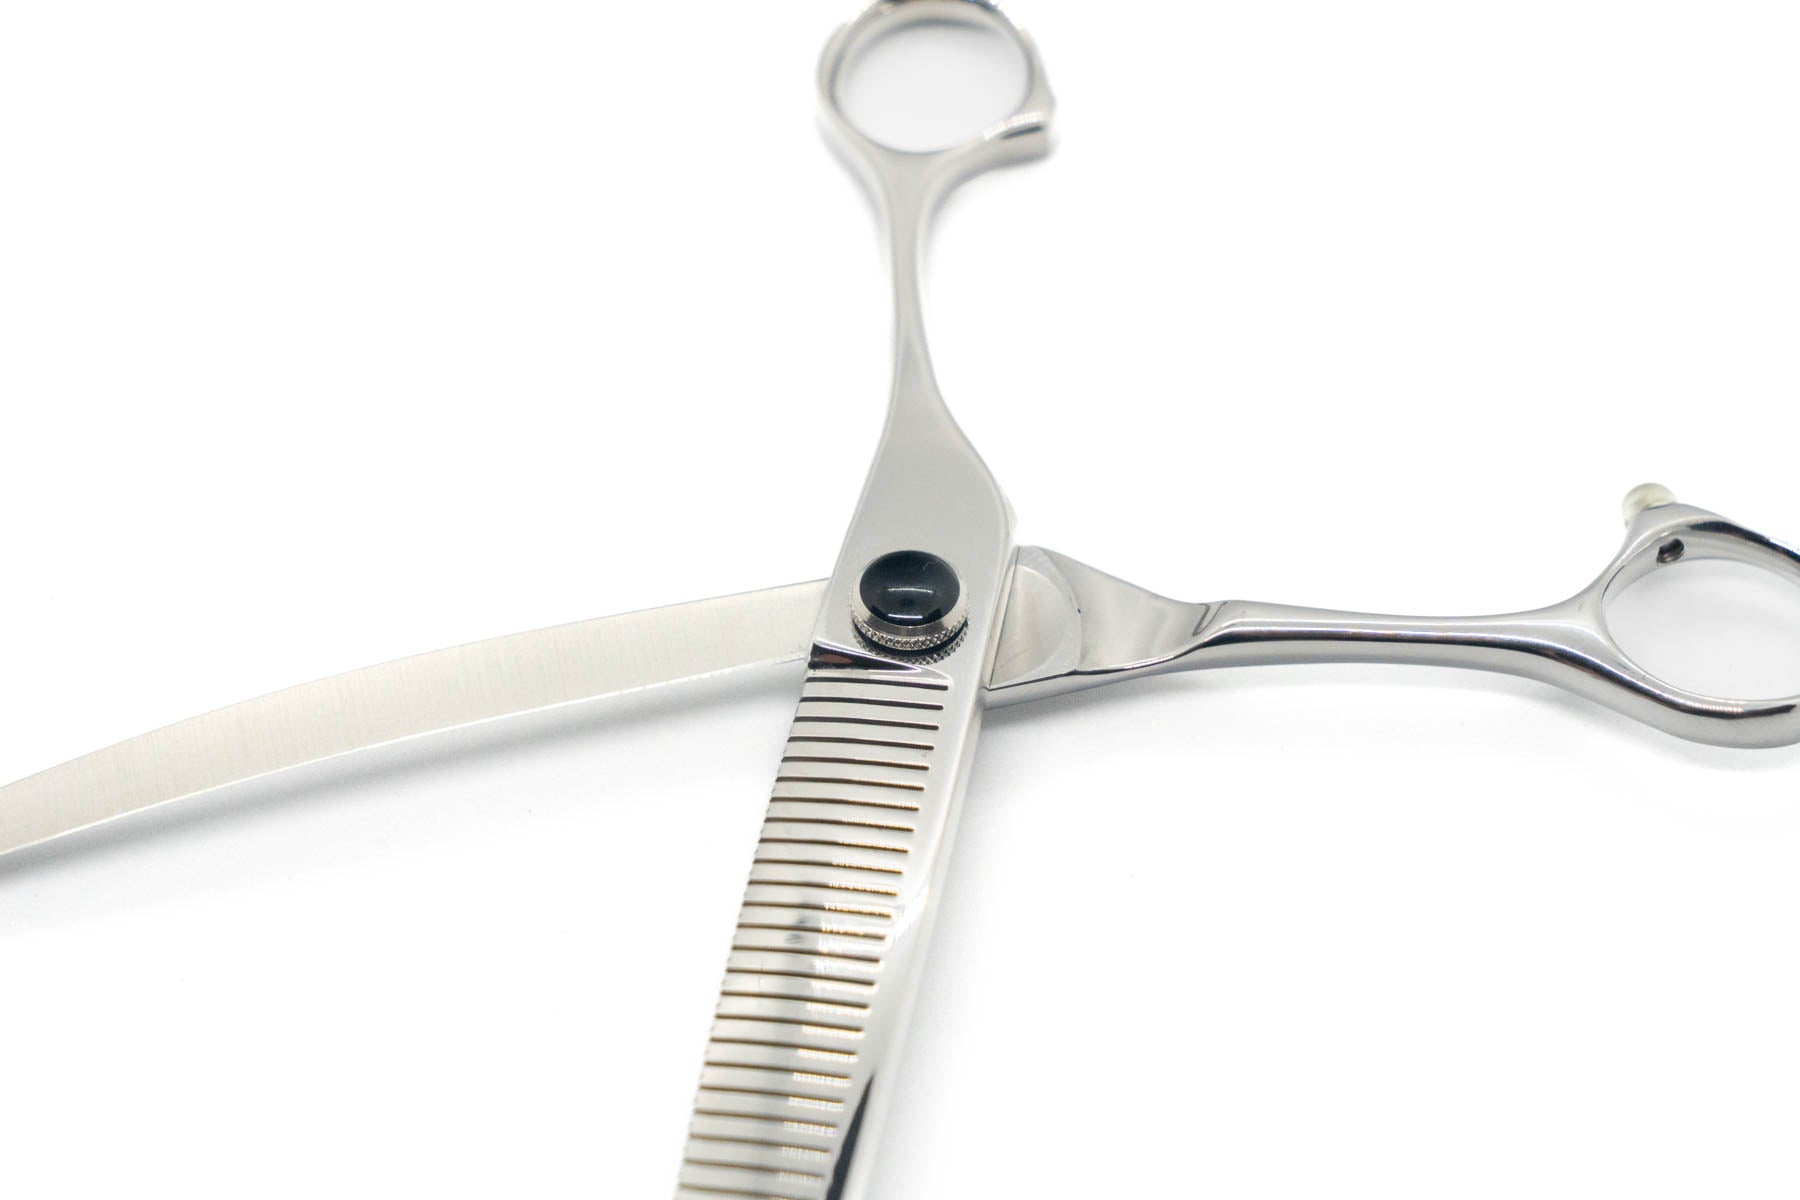 Kai Pet Grooming 7.5 inch Curved Thinning Scissor